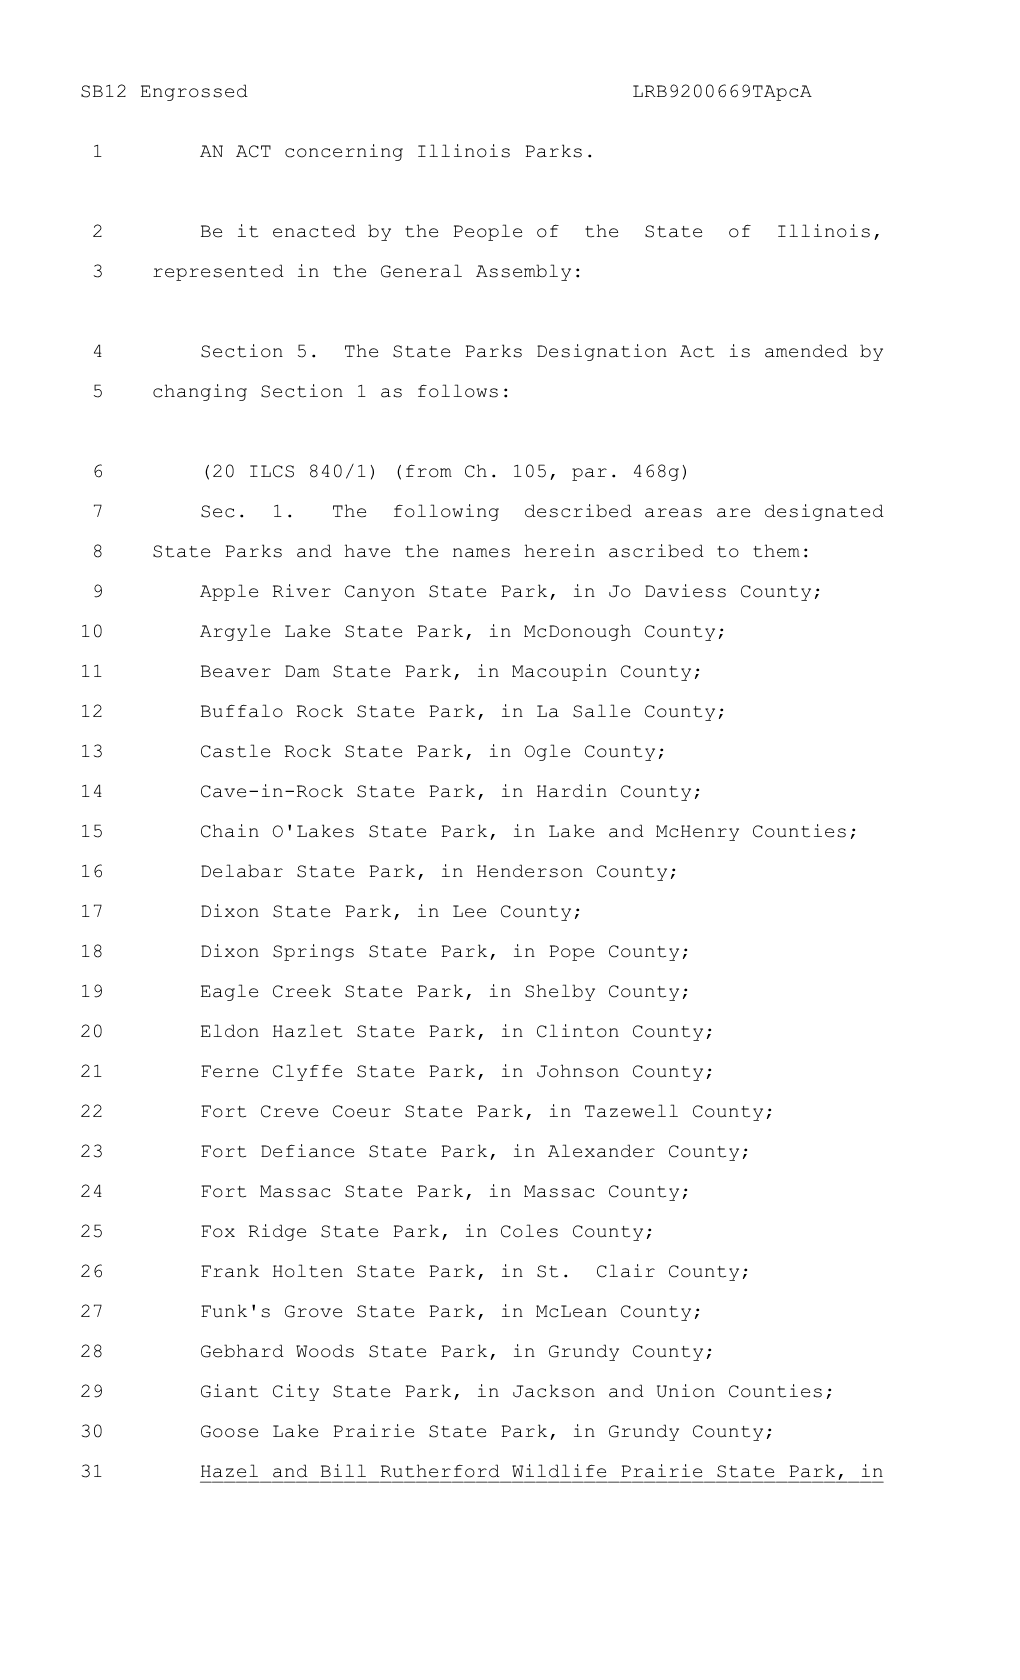 SB12 Engrossed Lrb9200669tapca 1 an ACT Concerning Illinois Parks